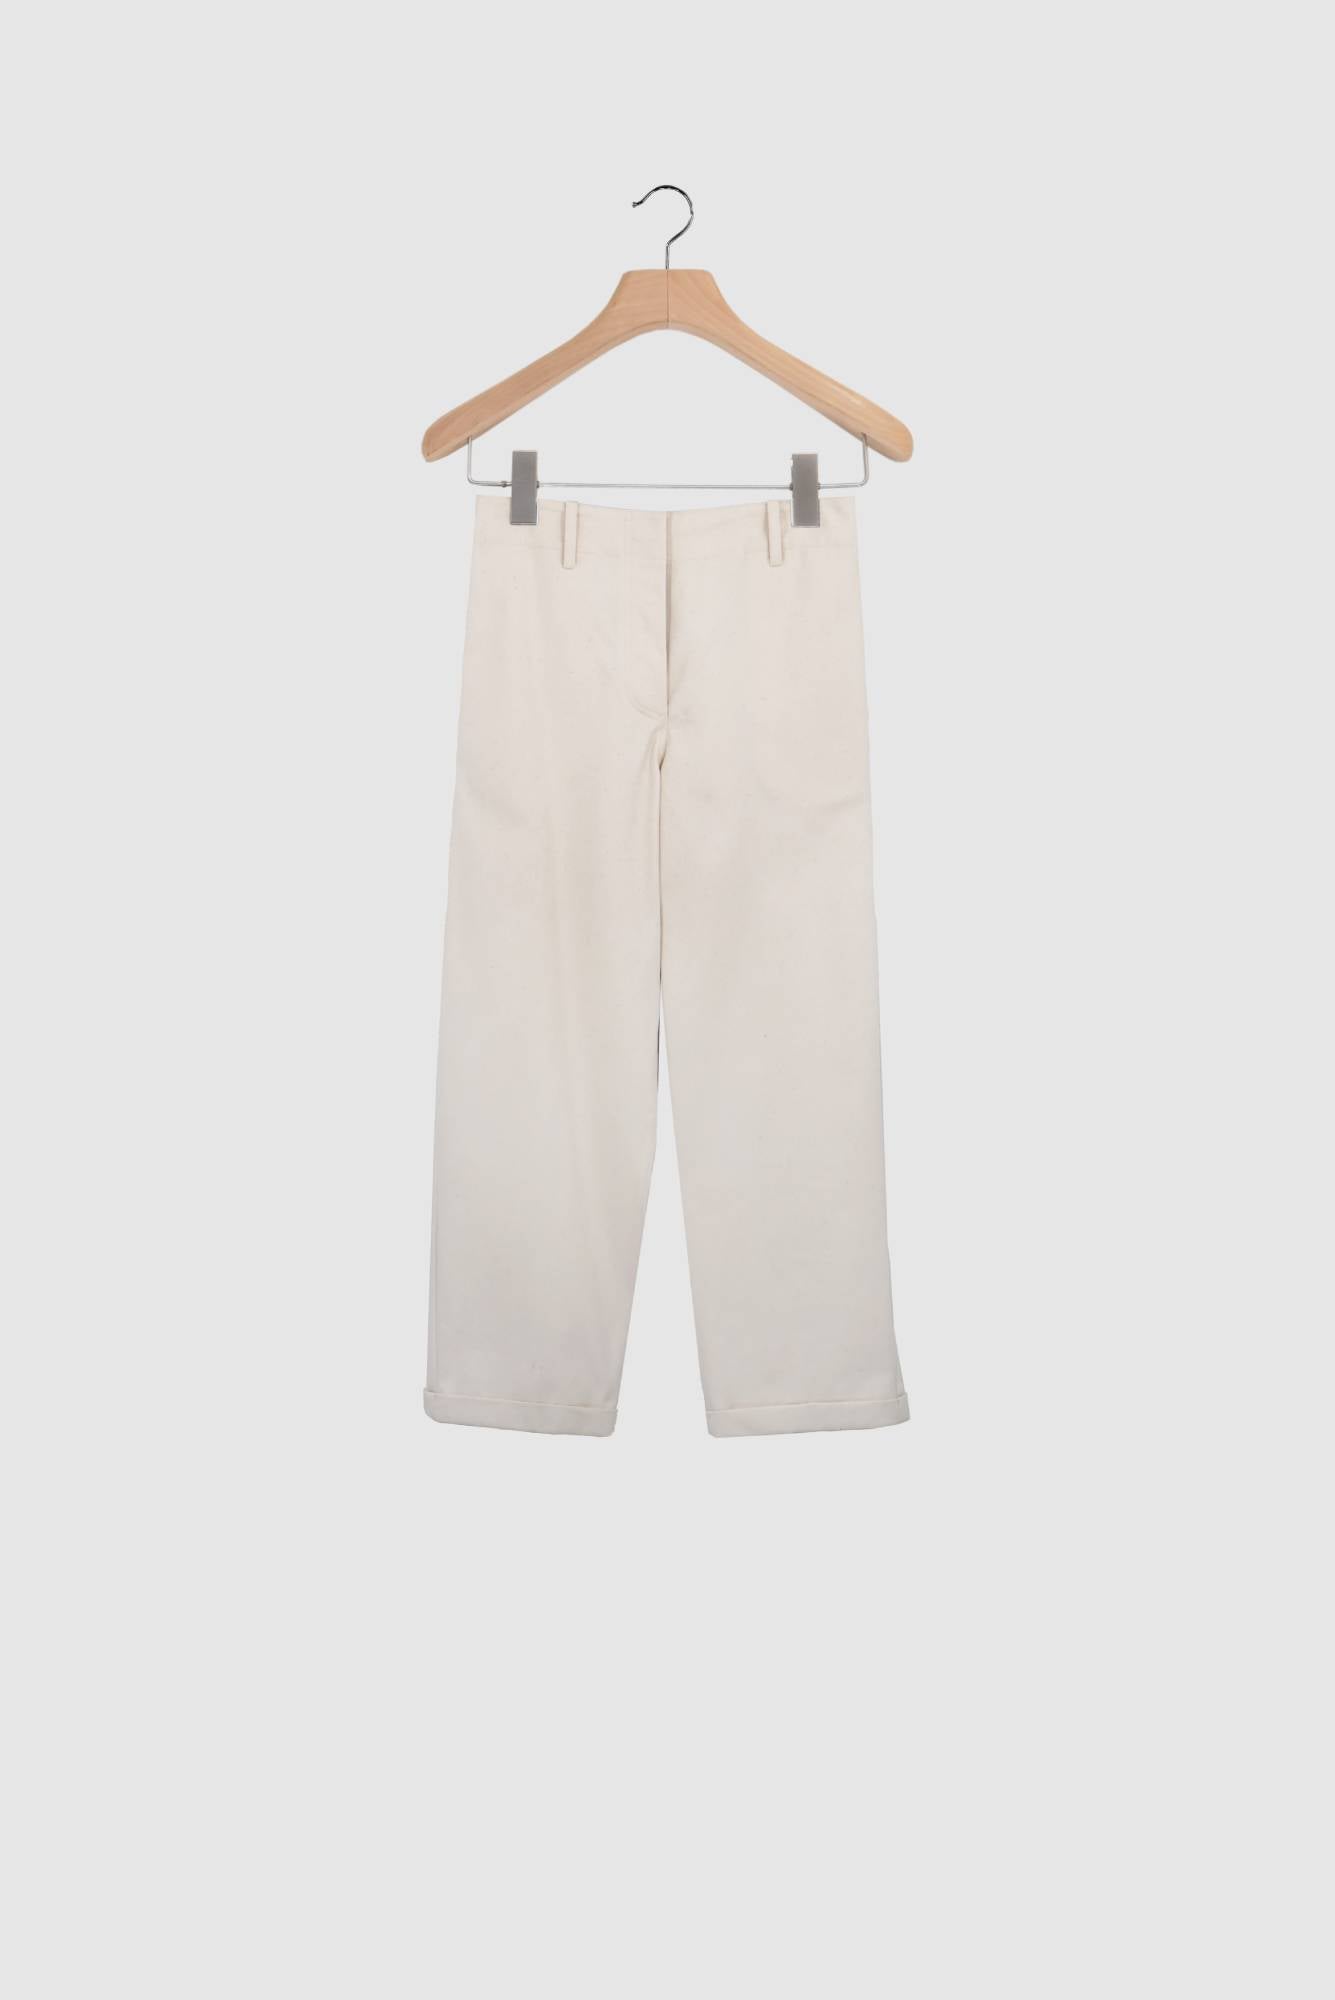 TOM - Cotton Twill Pants in in Undyed/Natural